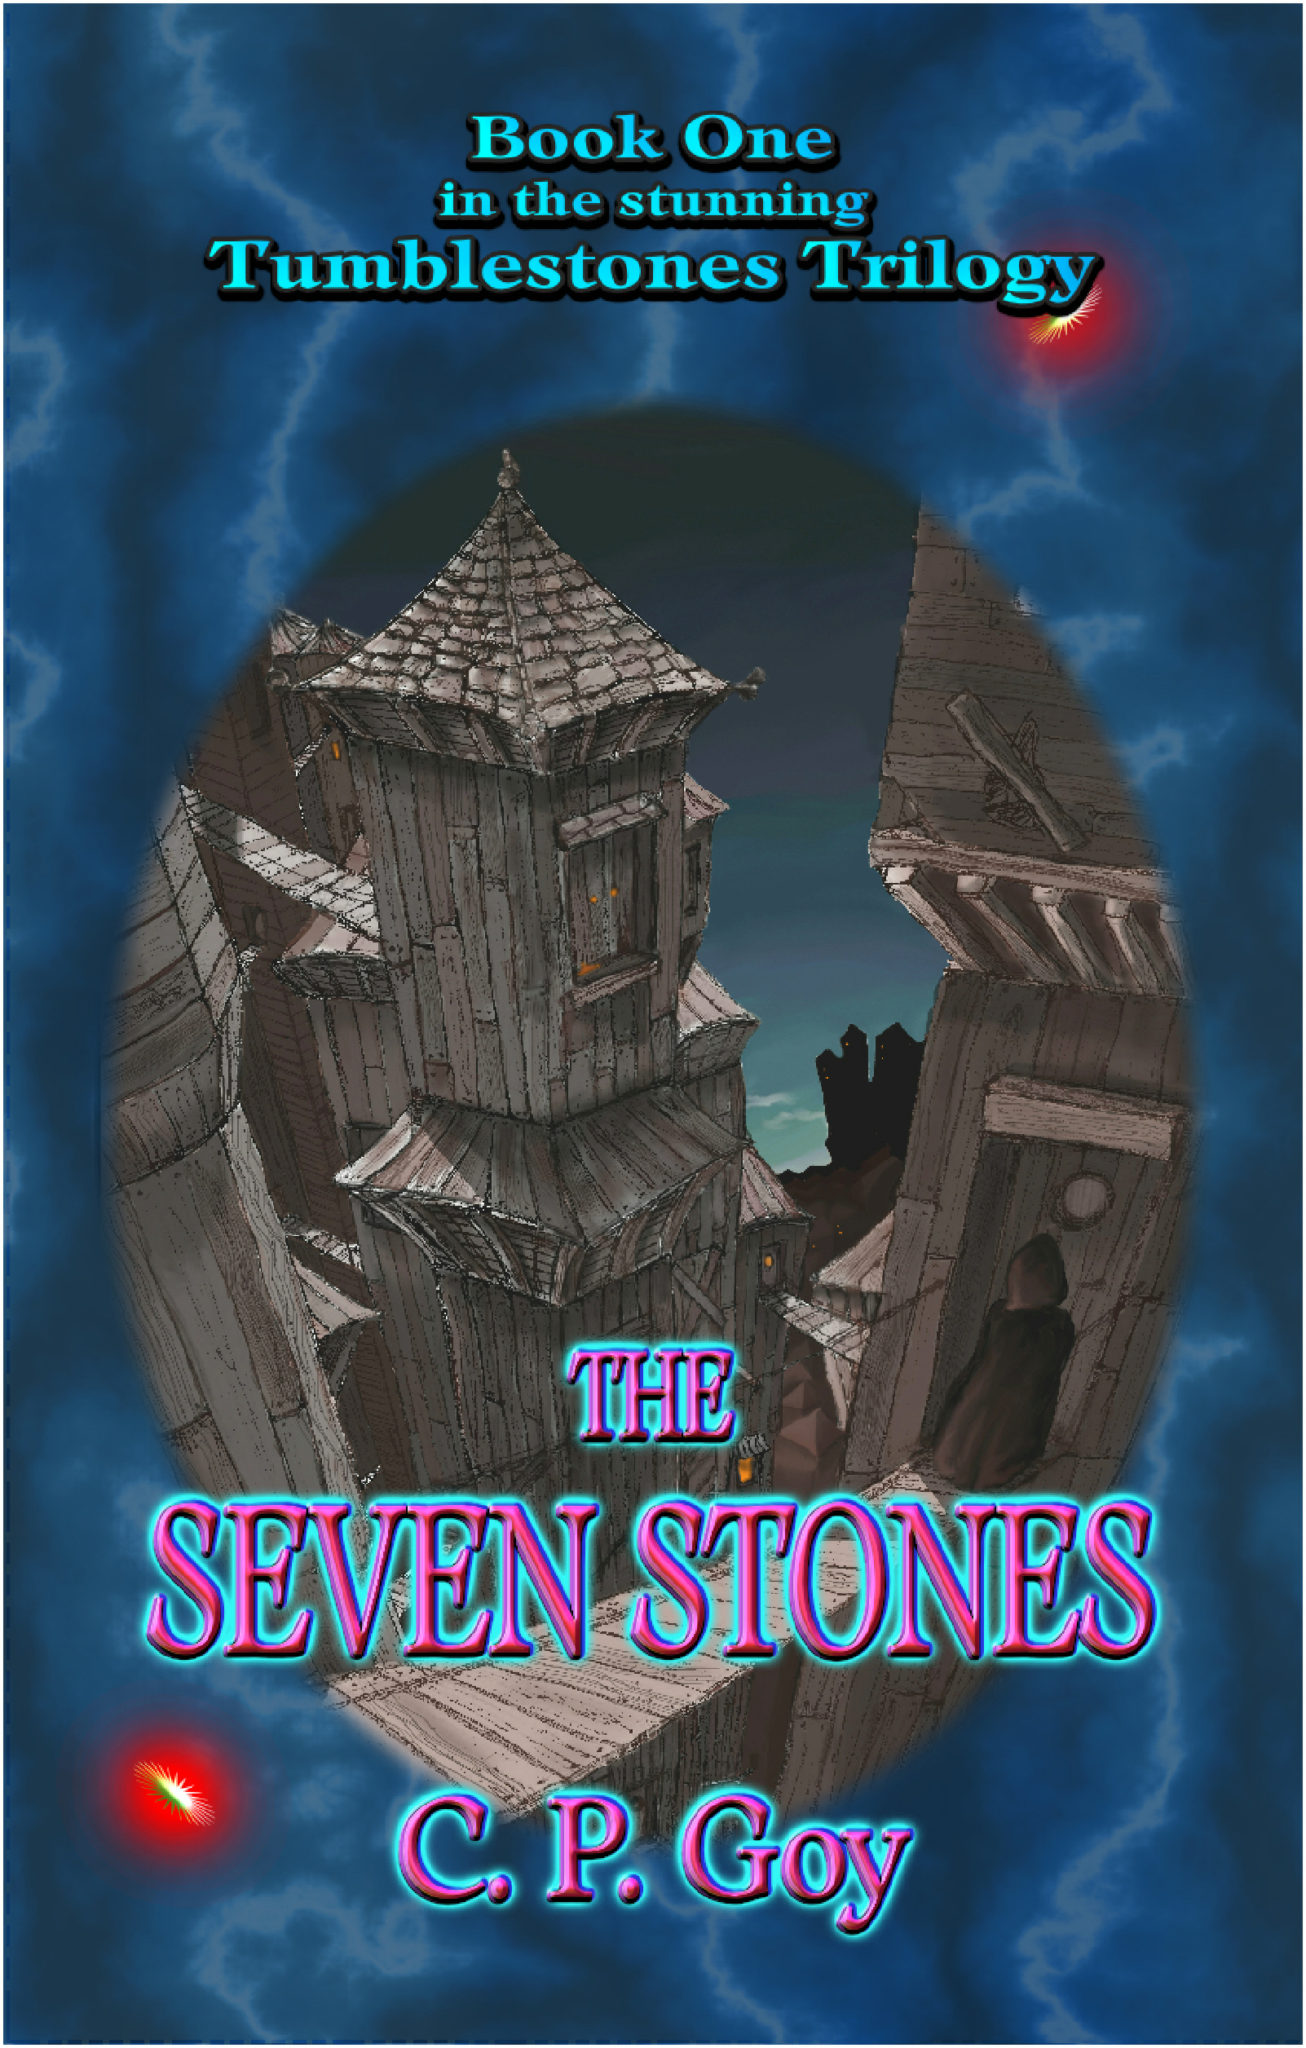 FREE: The Seven Stones by C.P. Goy